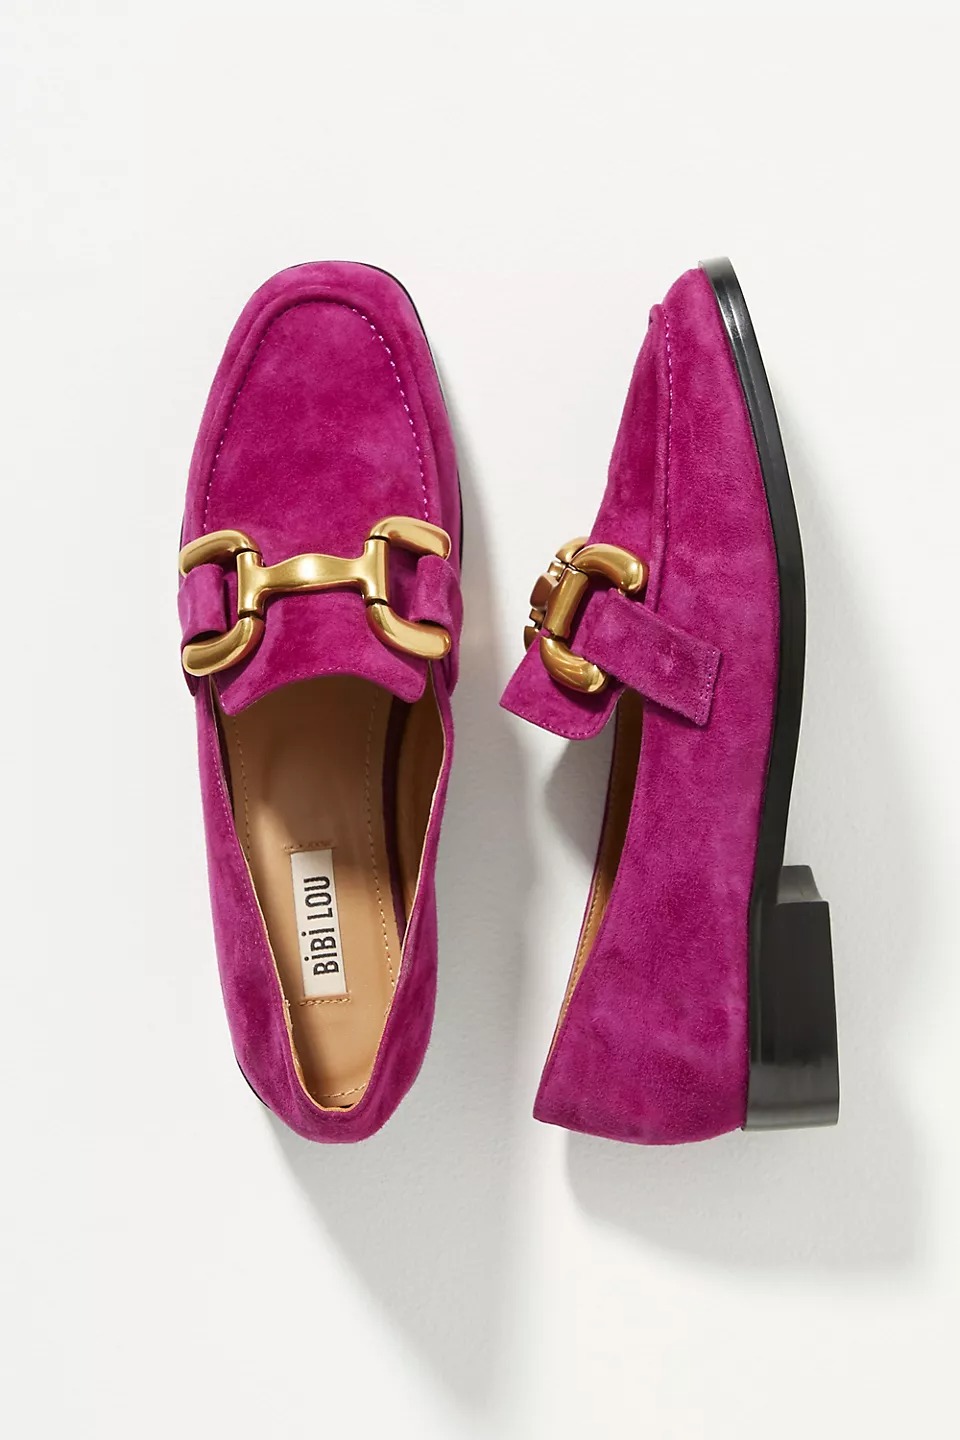 Best loafers for women from luxury designer fashion brands like Gucci, including chunky and classic styles perfect for fall 2022.